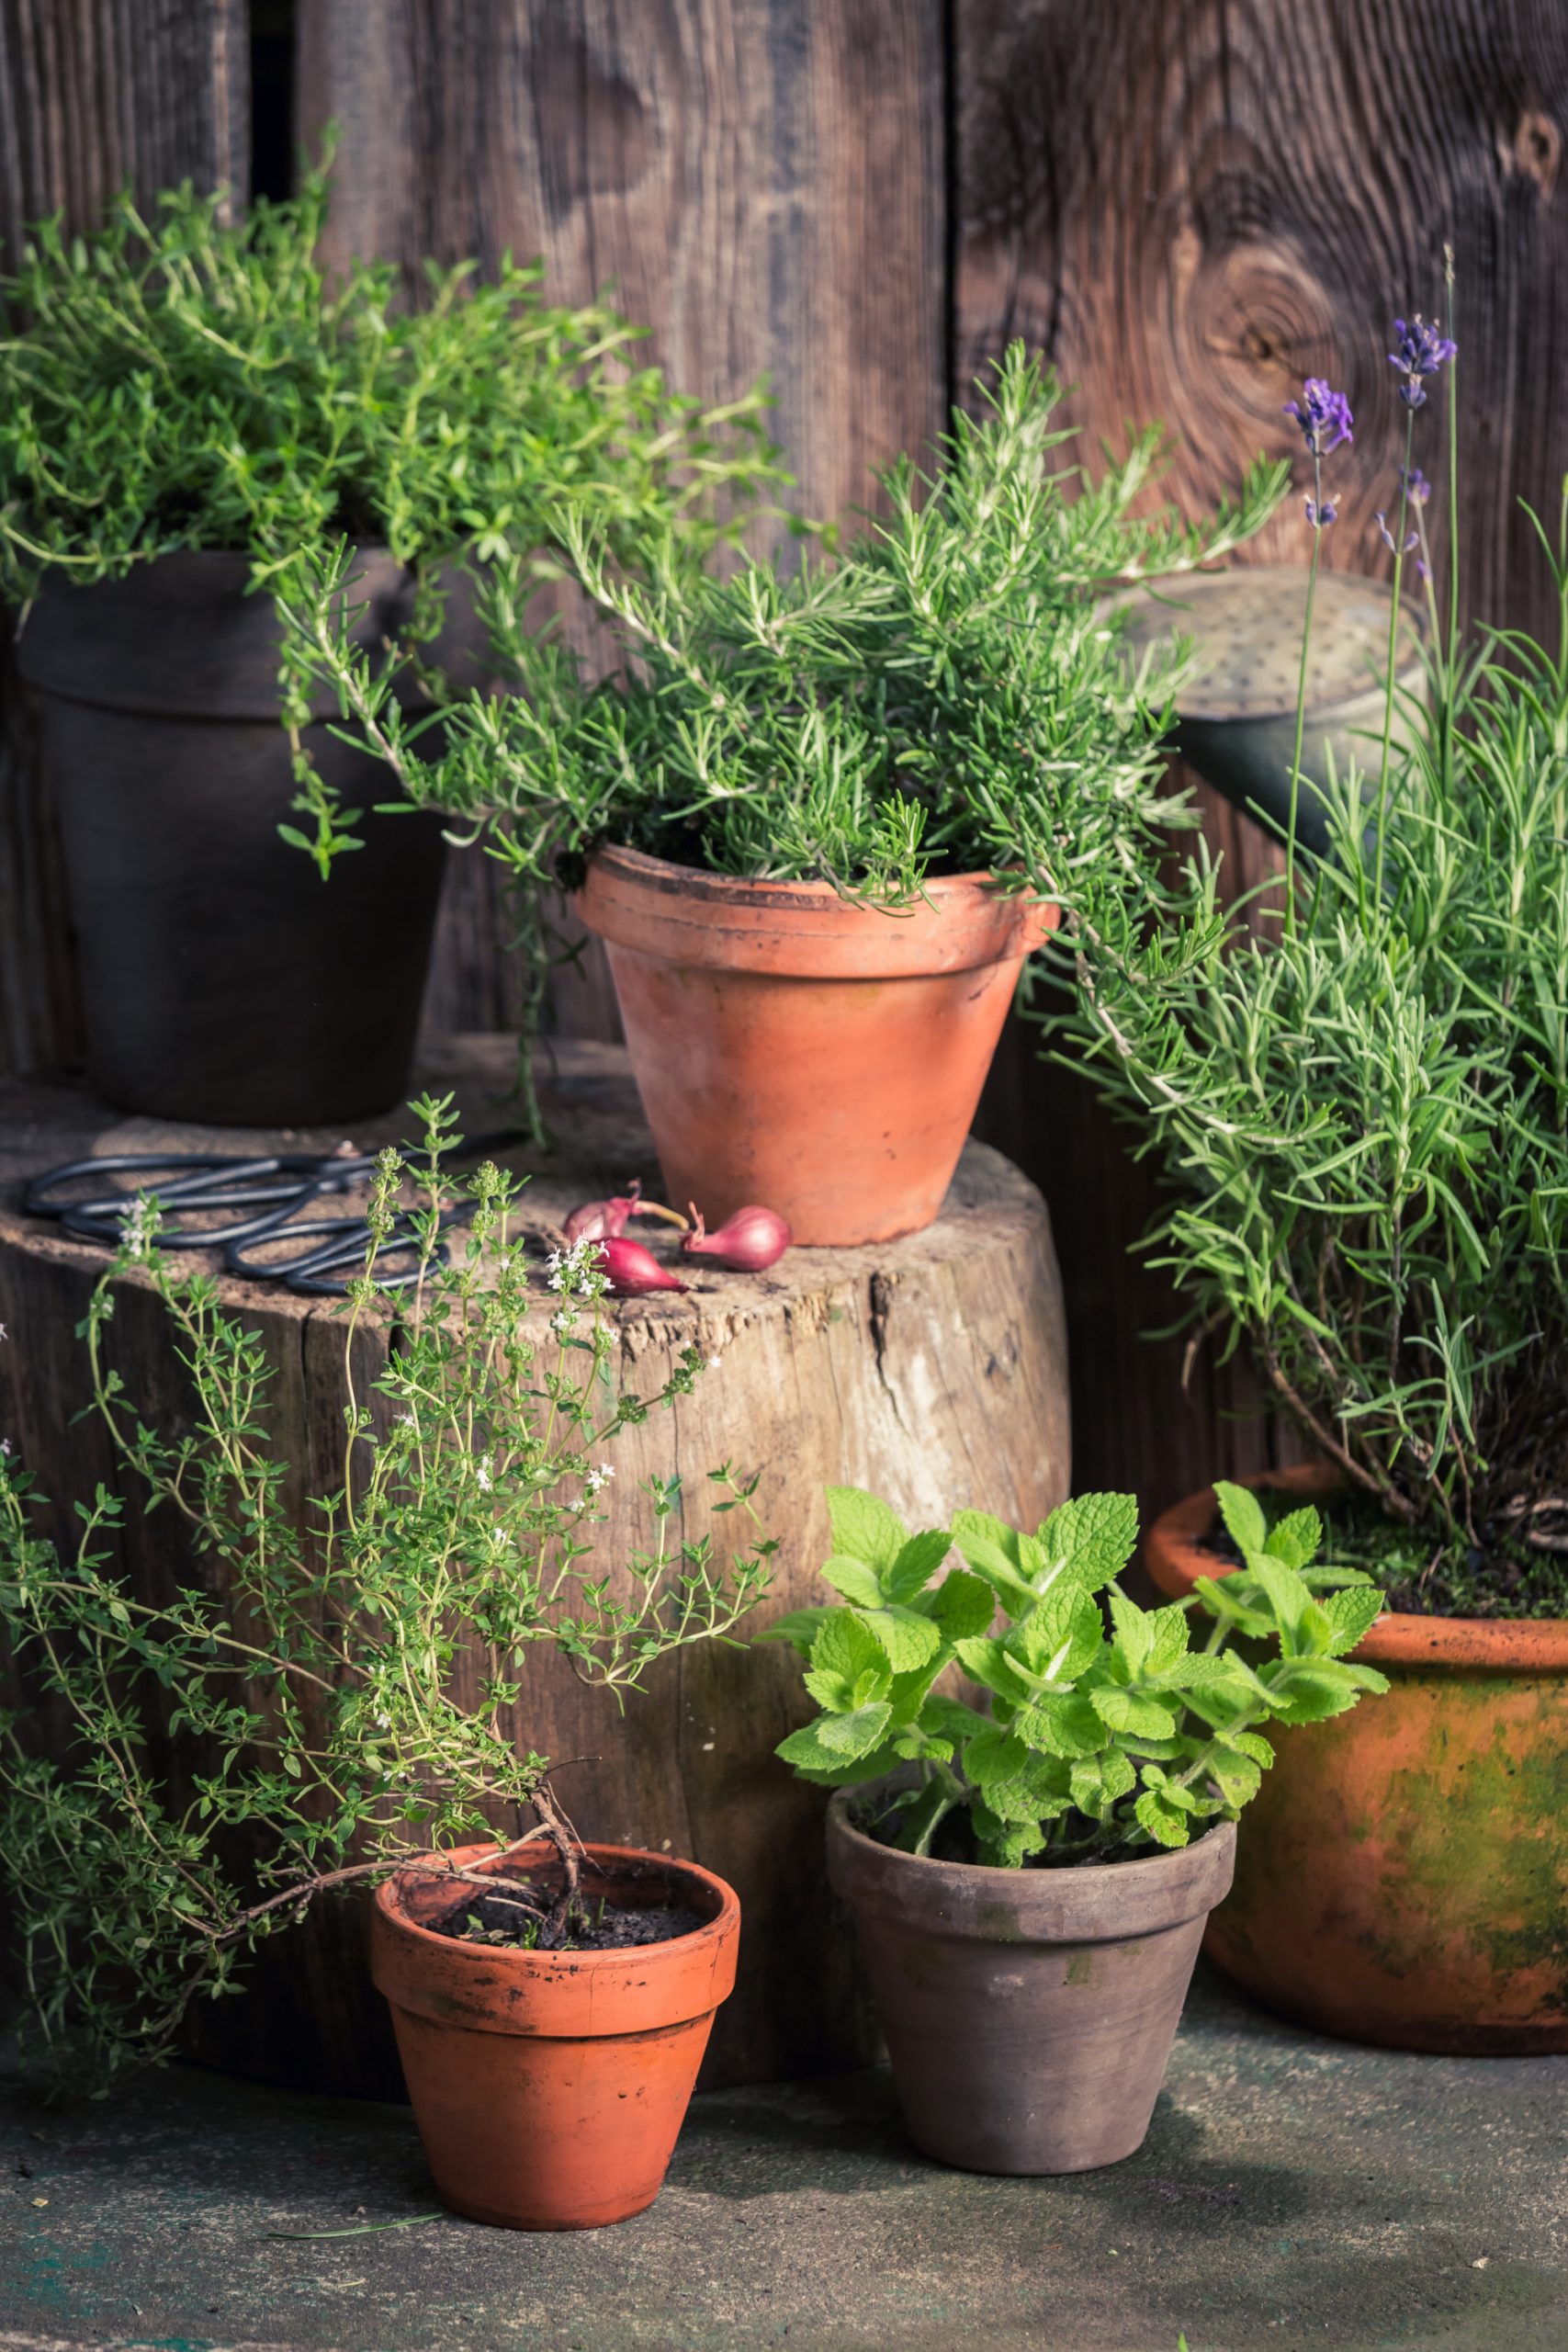 How to Start an Herb Garden: Tips for First-Time Gardeners.